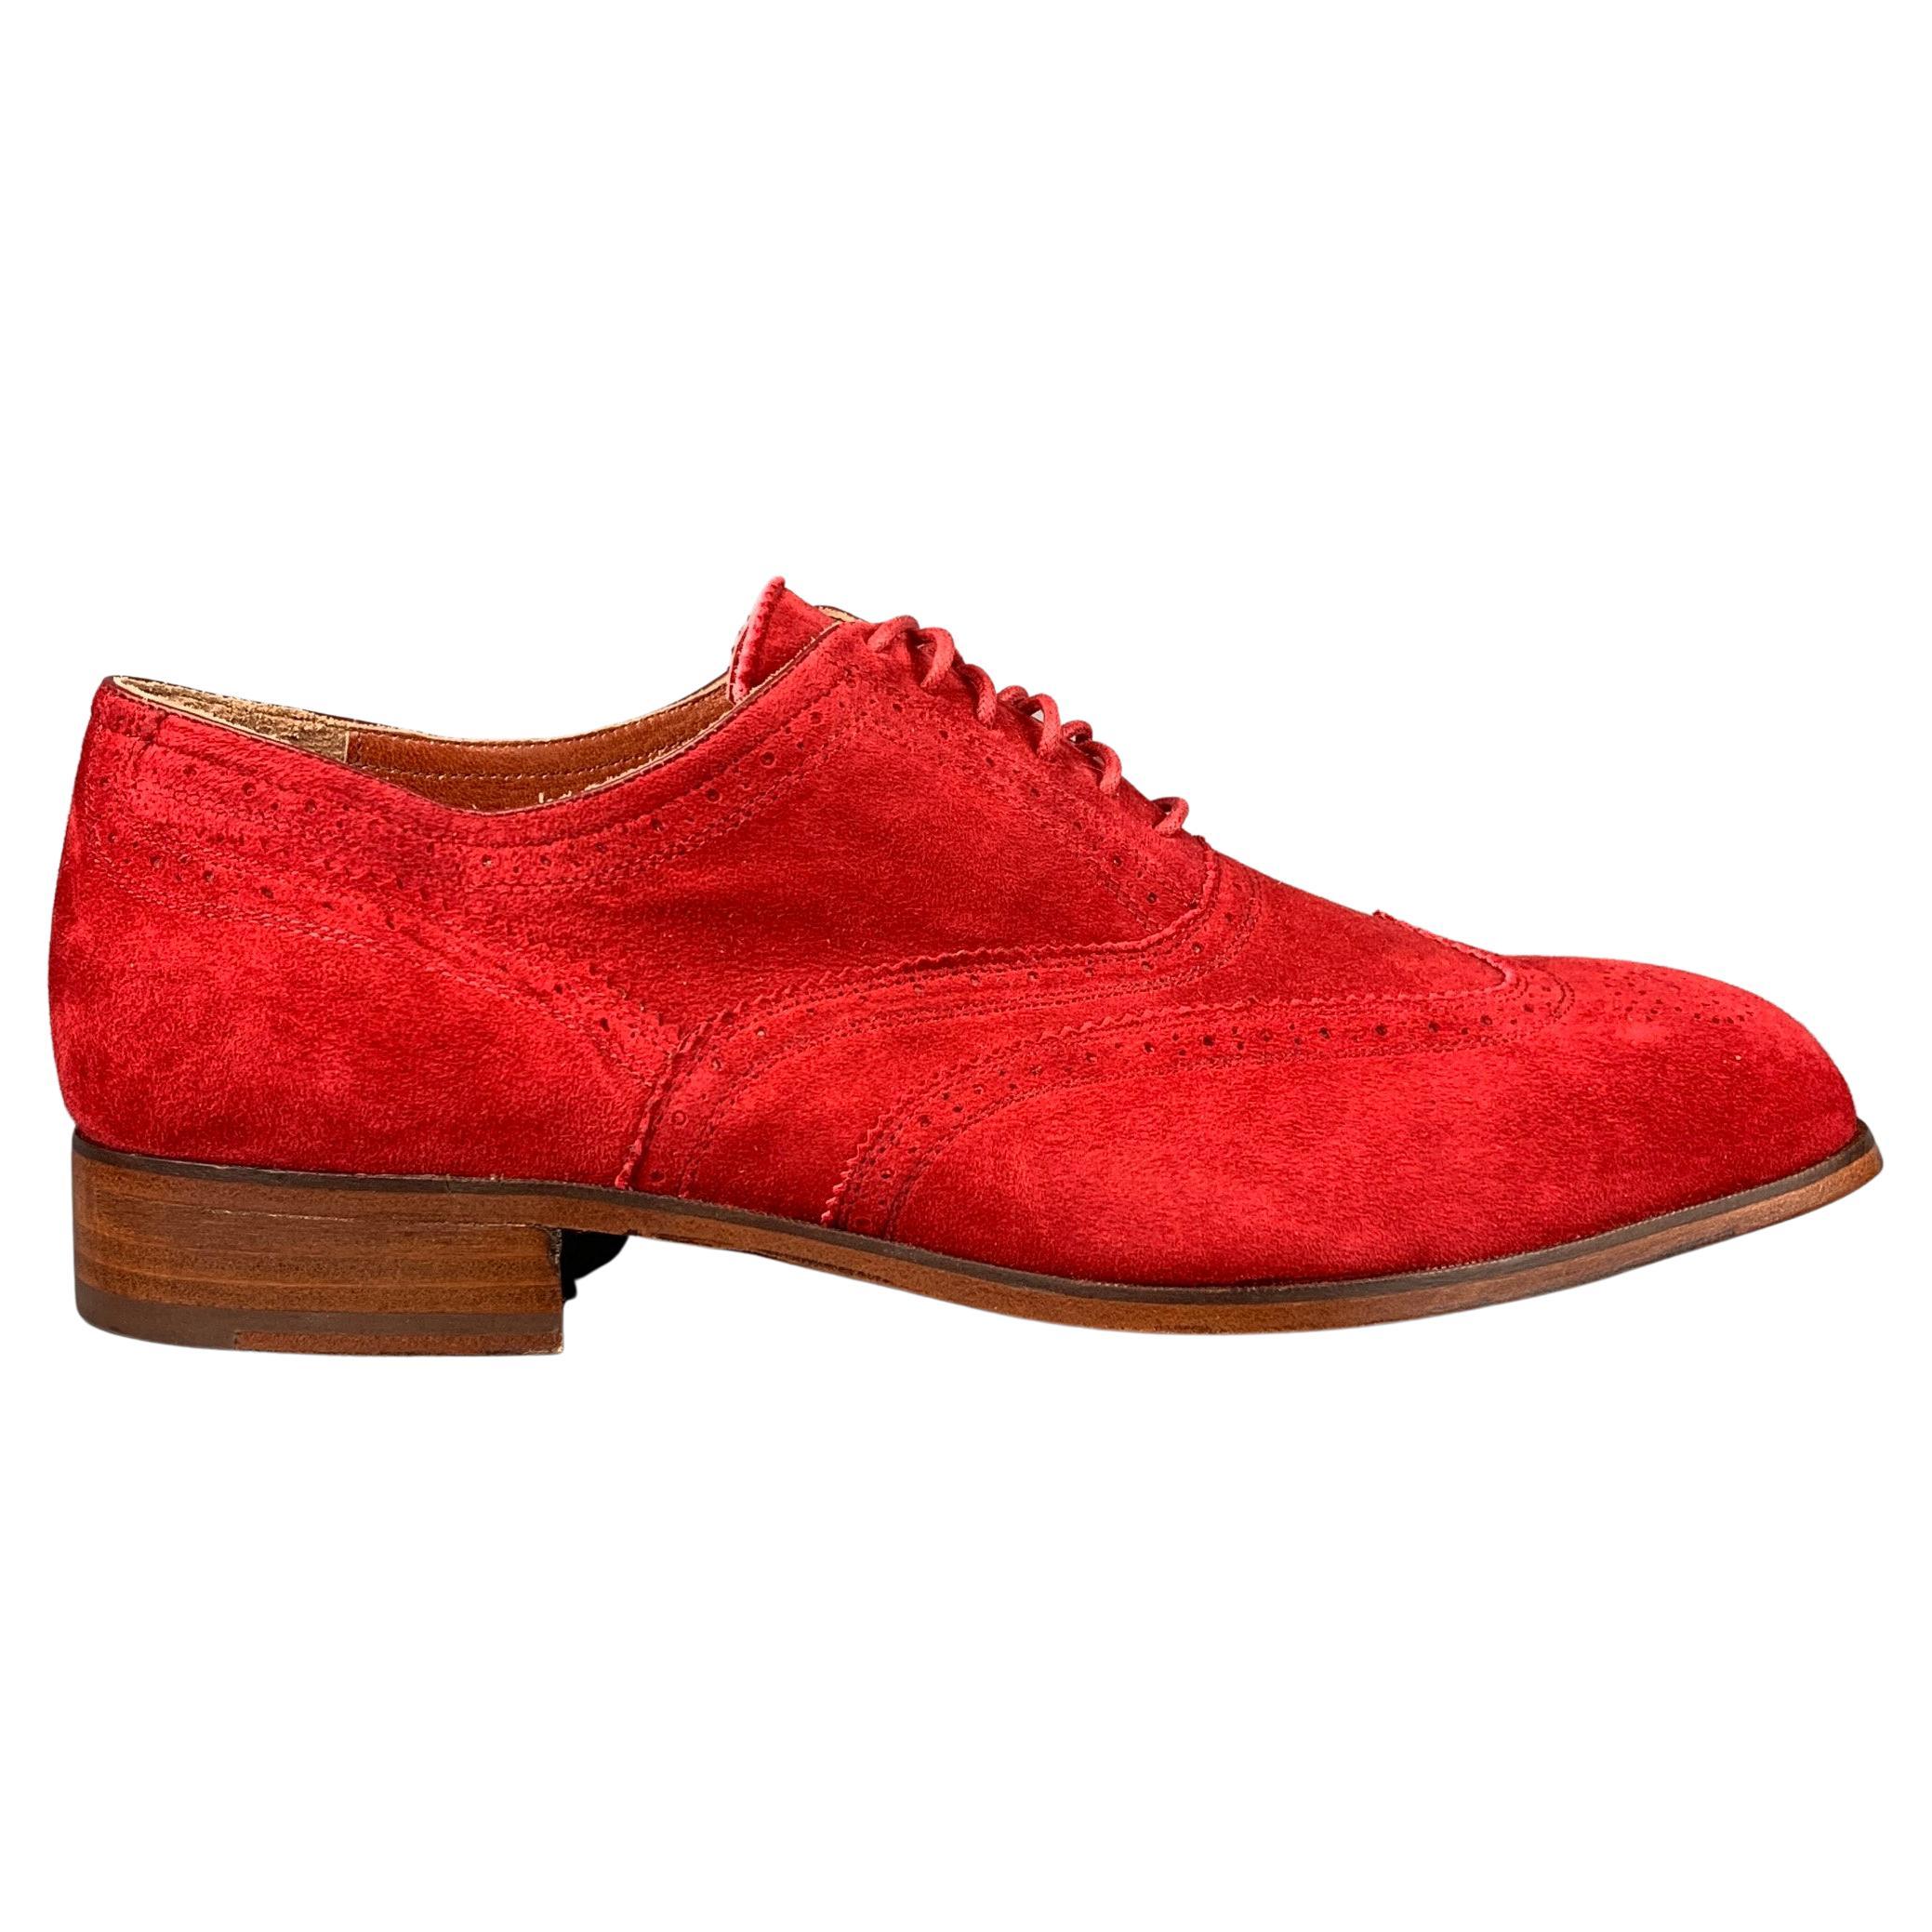 FLORSHEIM by DUCKIE BROWN Size 13 Red Perforated Leather Wingtip Lace Up Shoes